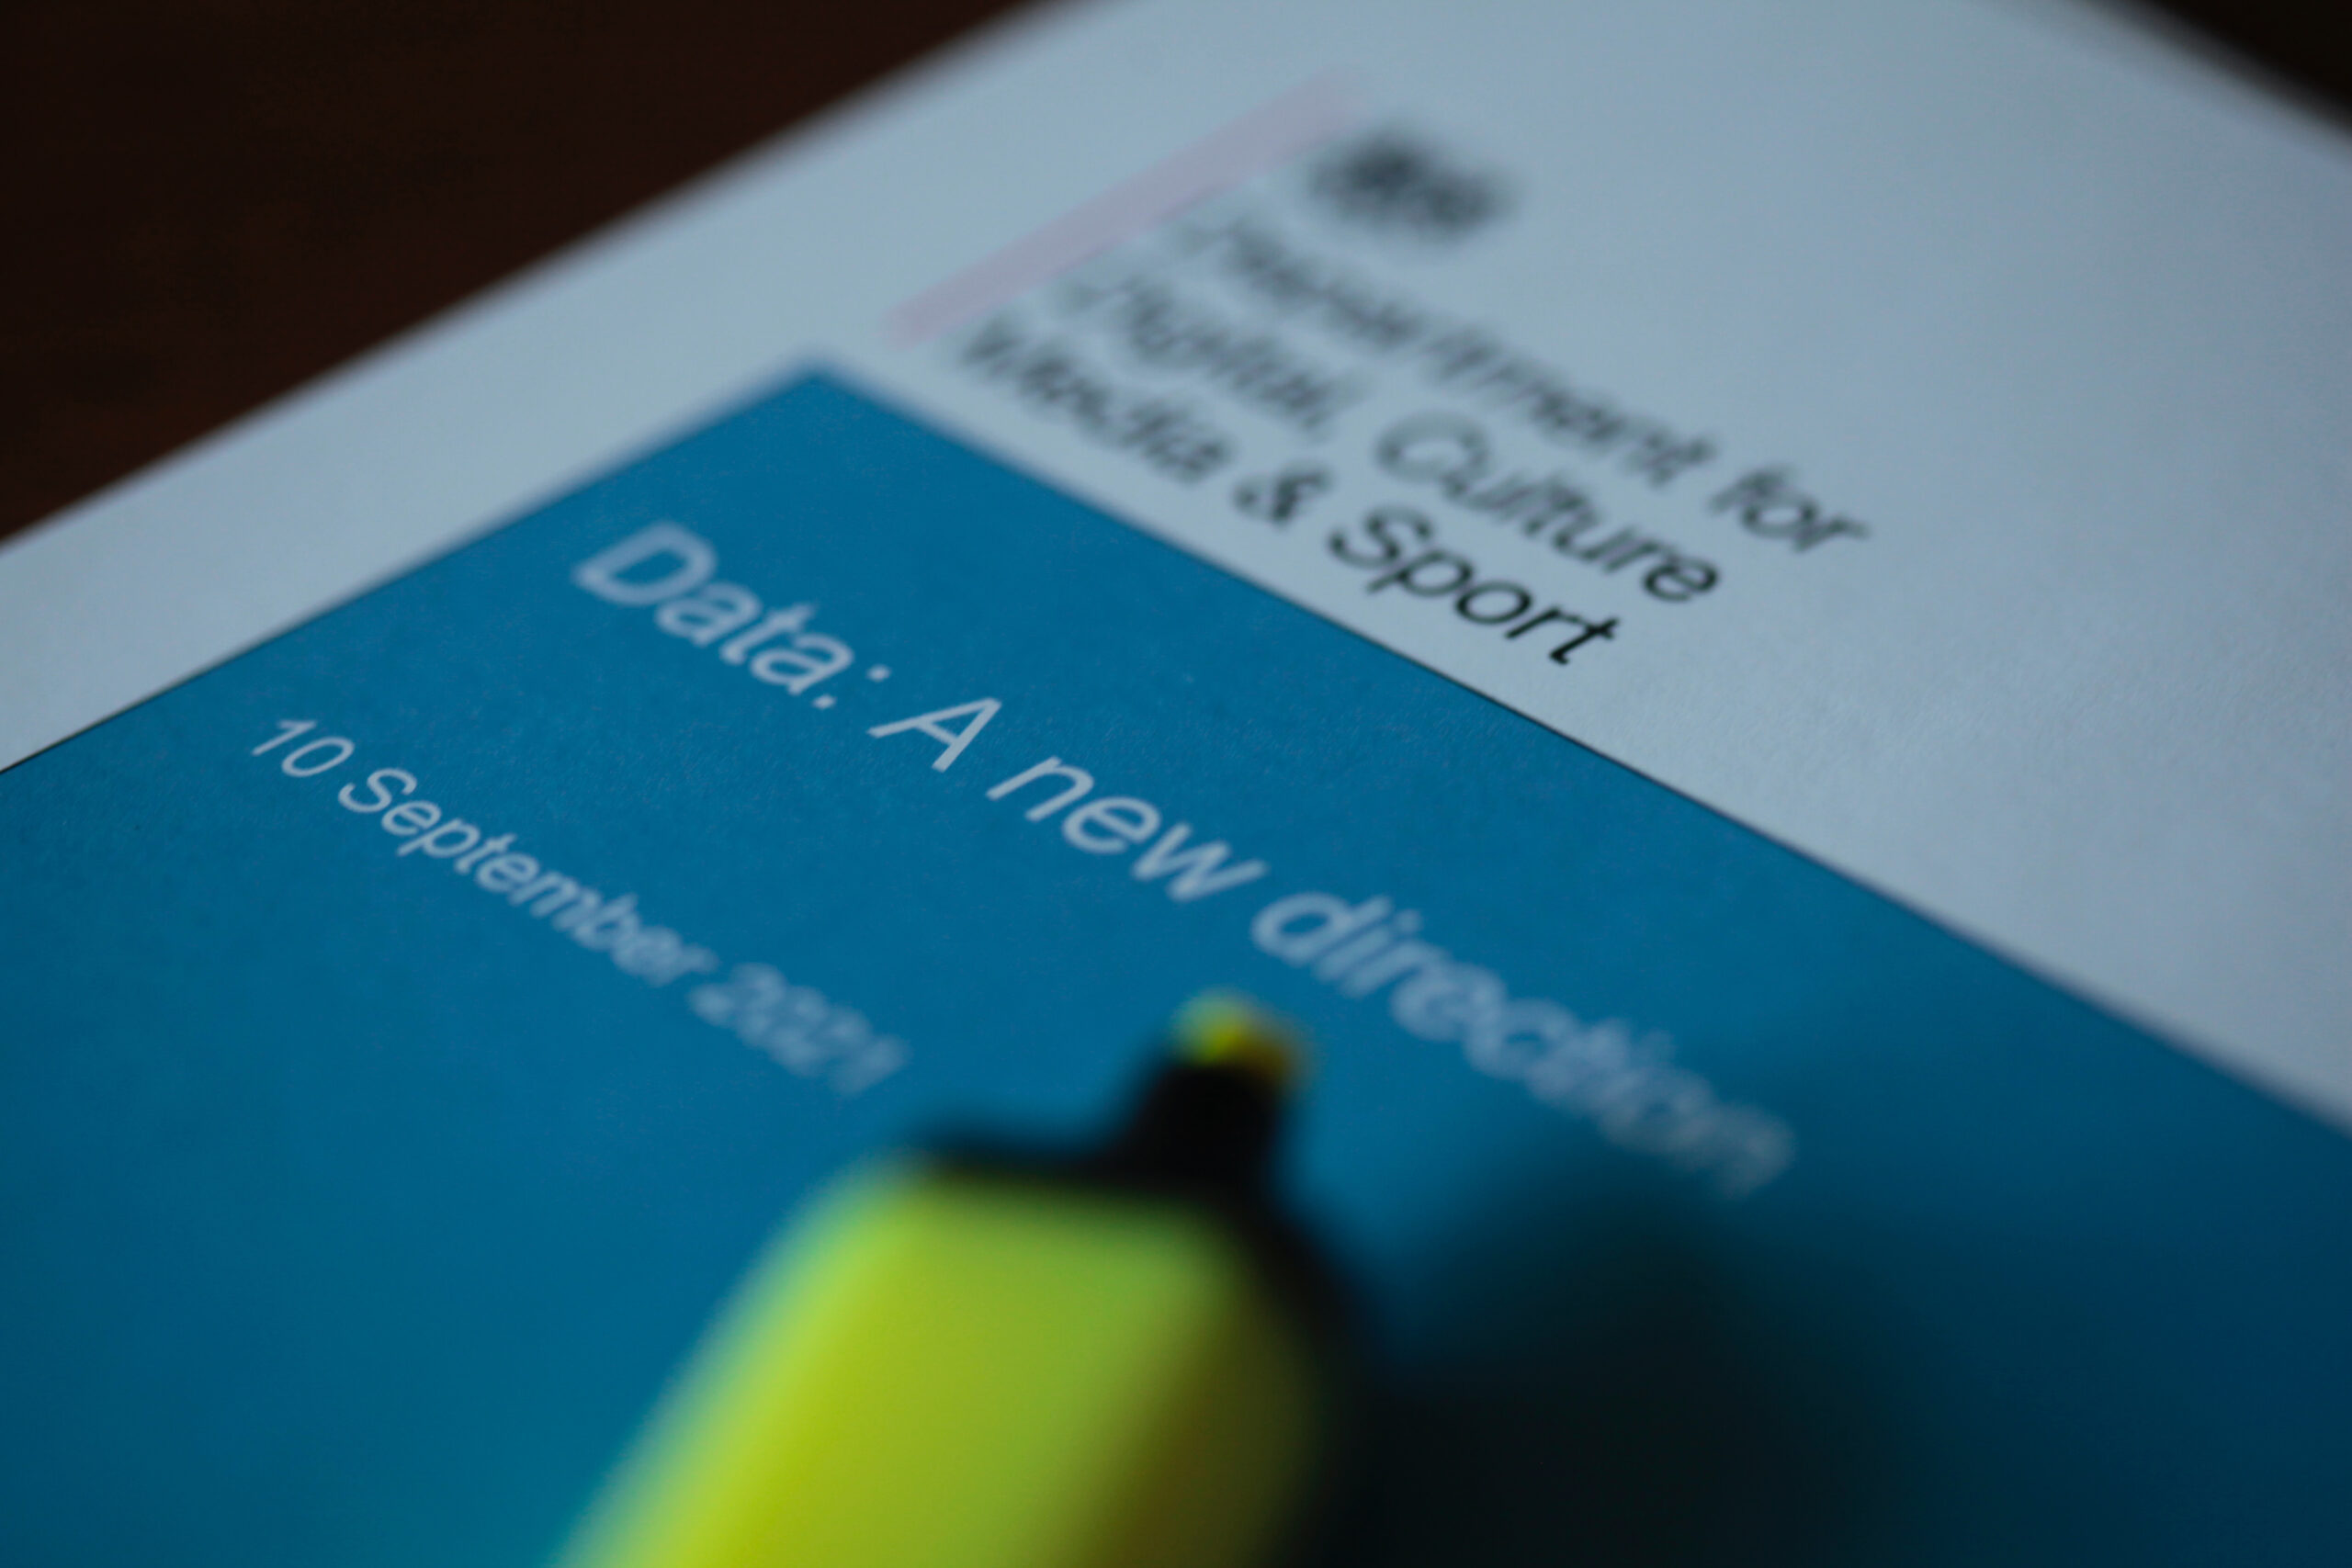 A photo of the Data: a new direction consultation document with a yellow highlighter pen resting on the cover